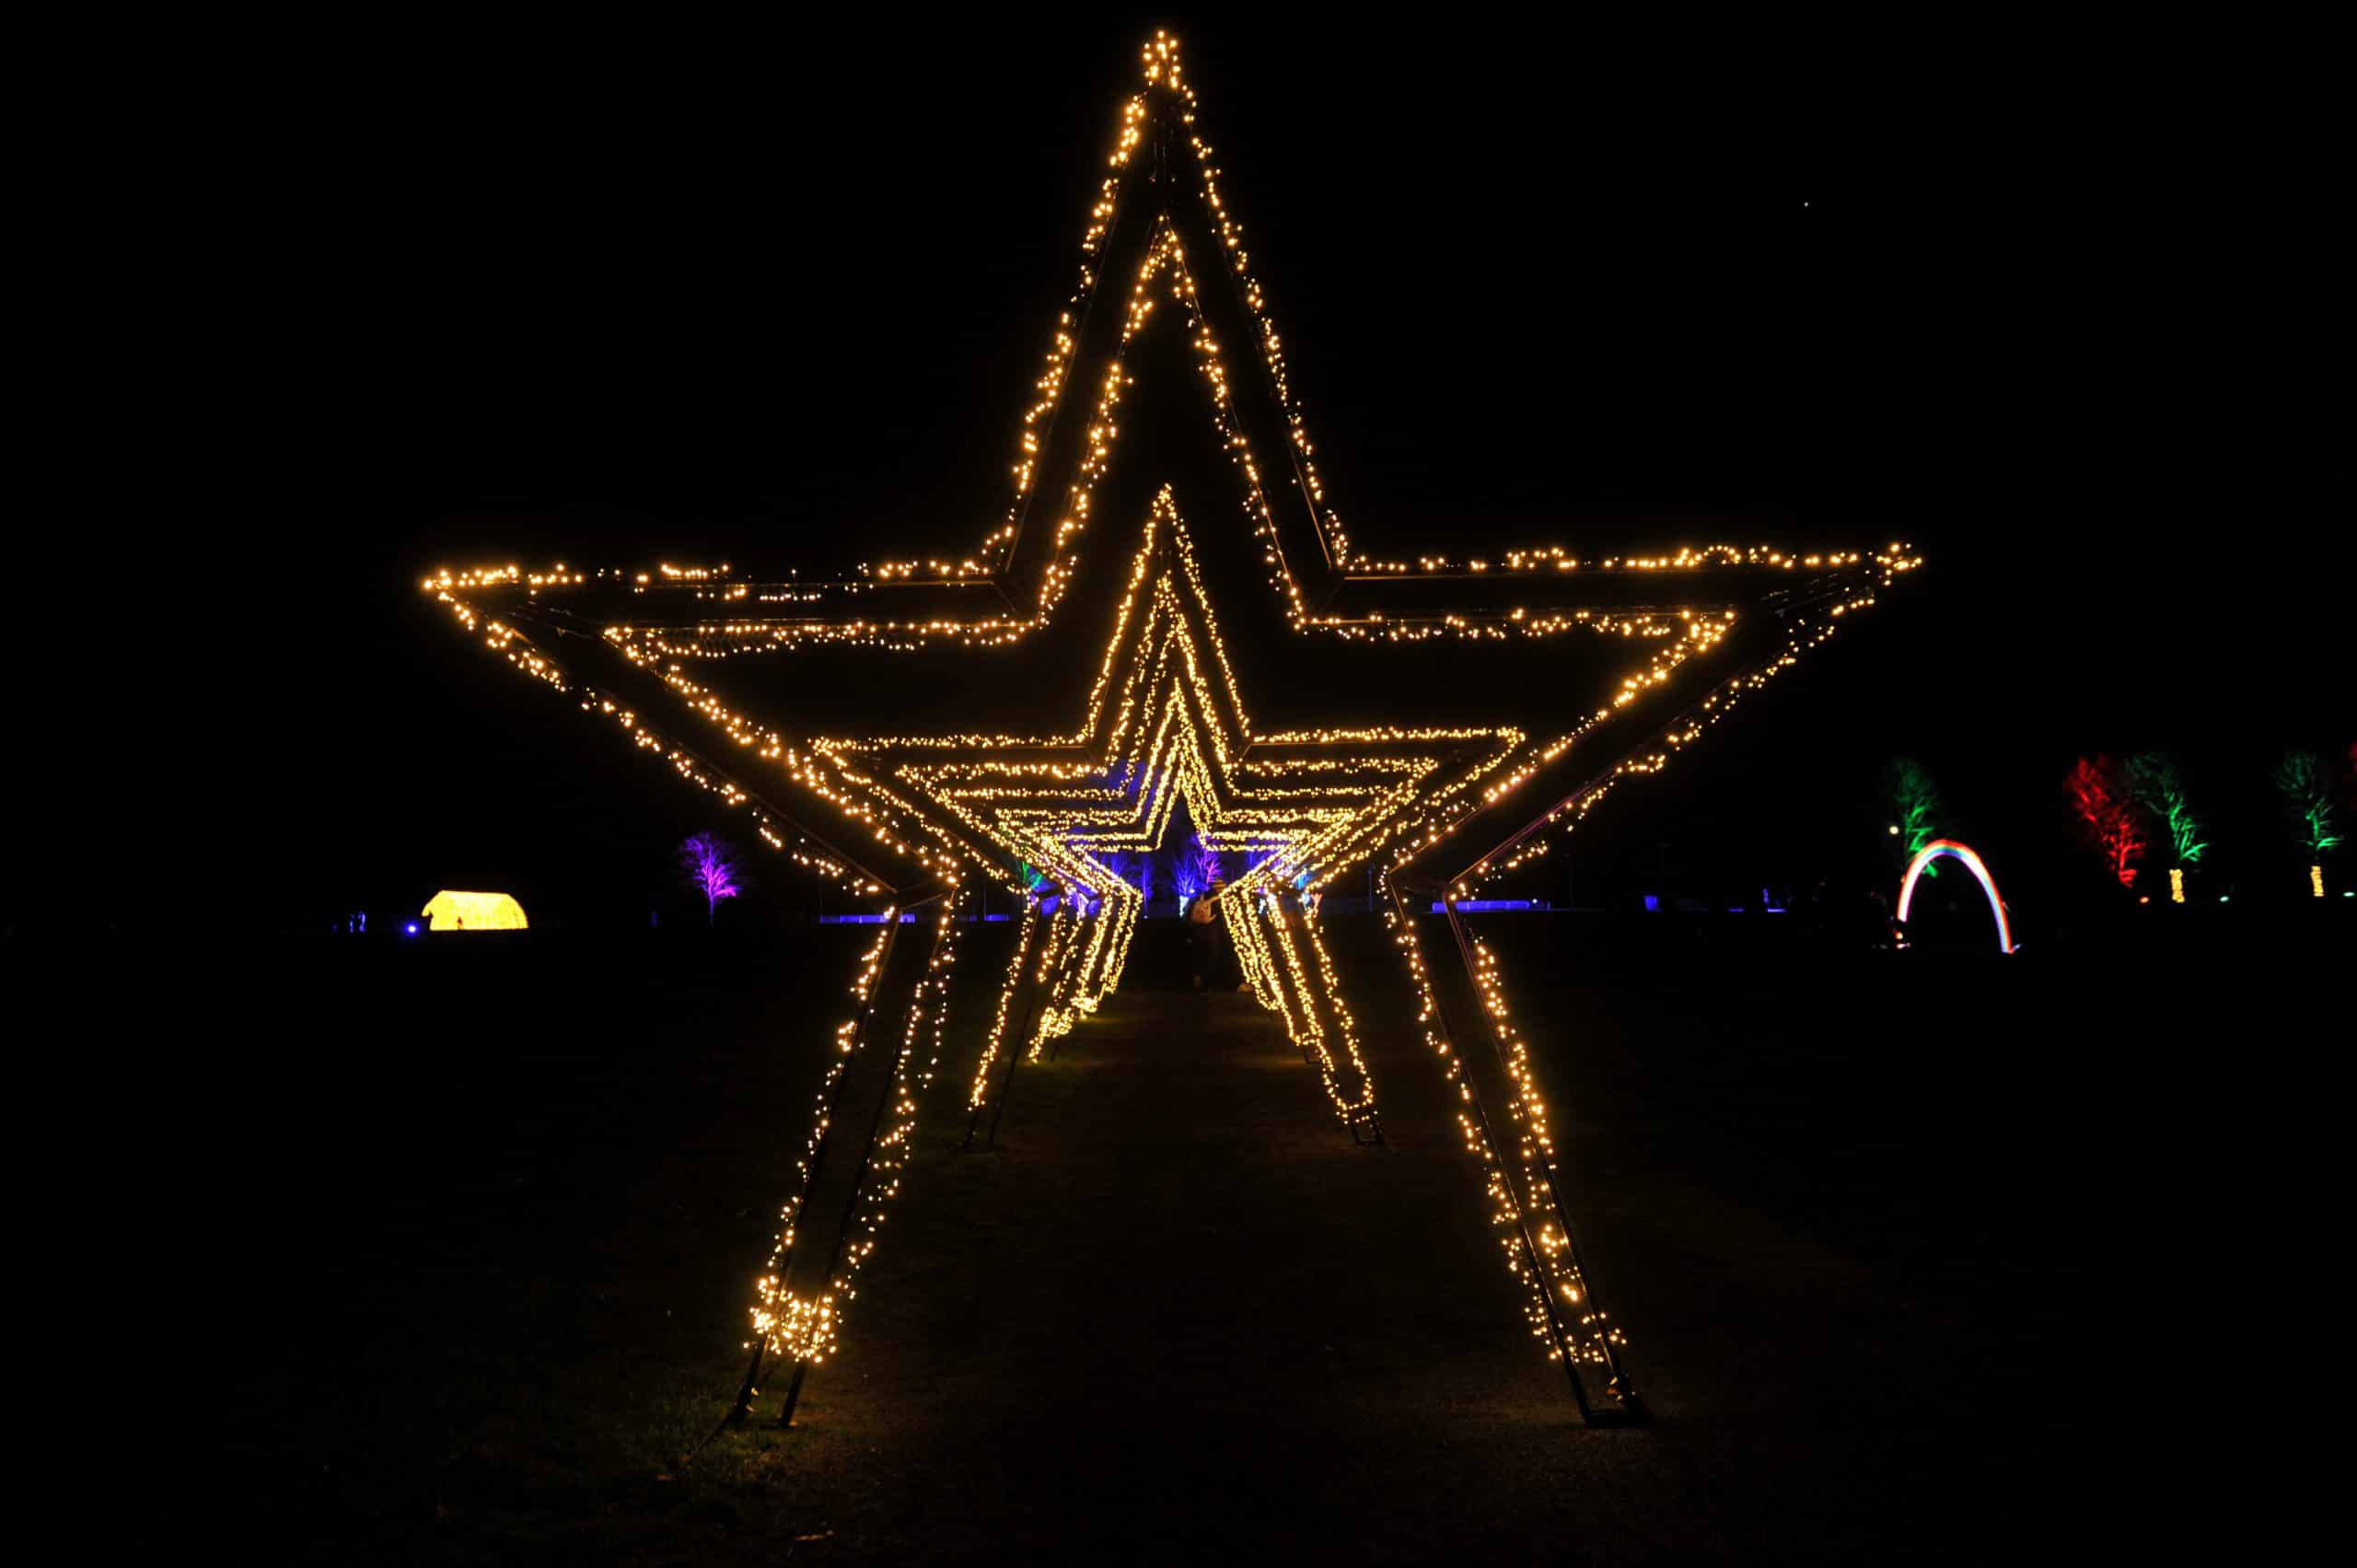 a head on view of the illuminated star arch.